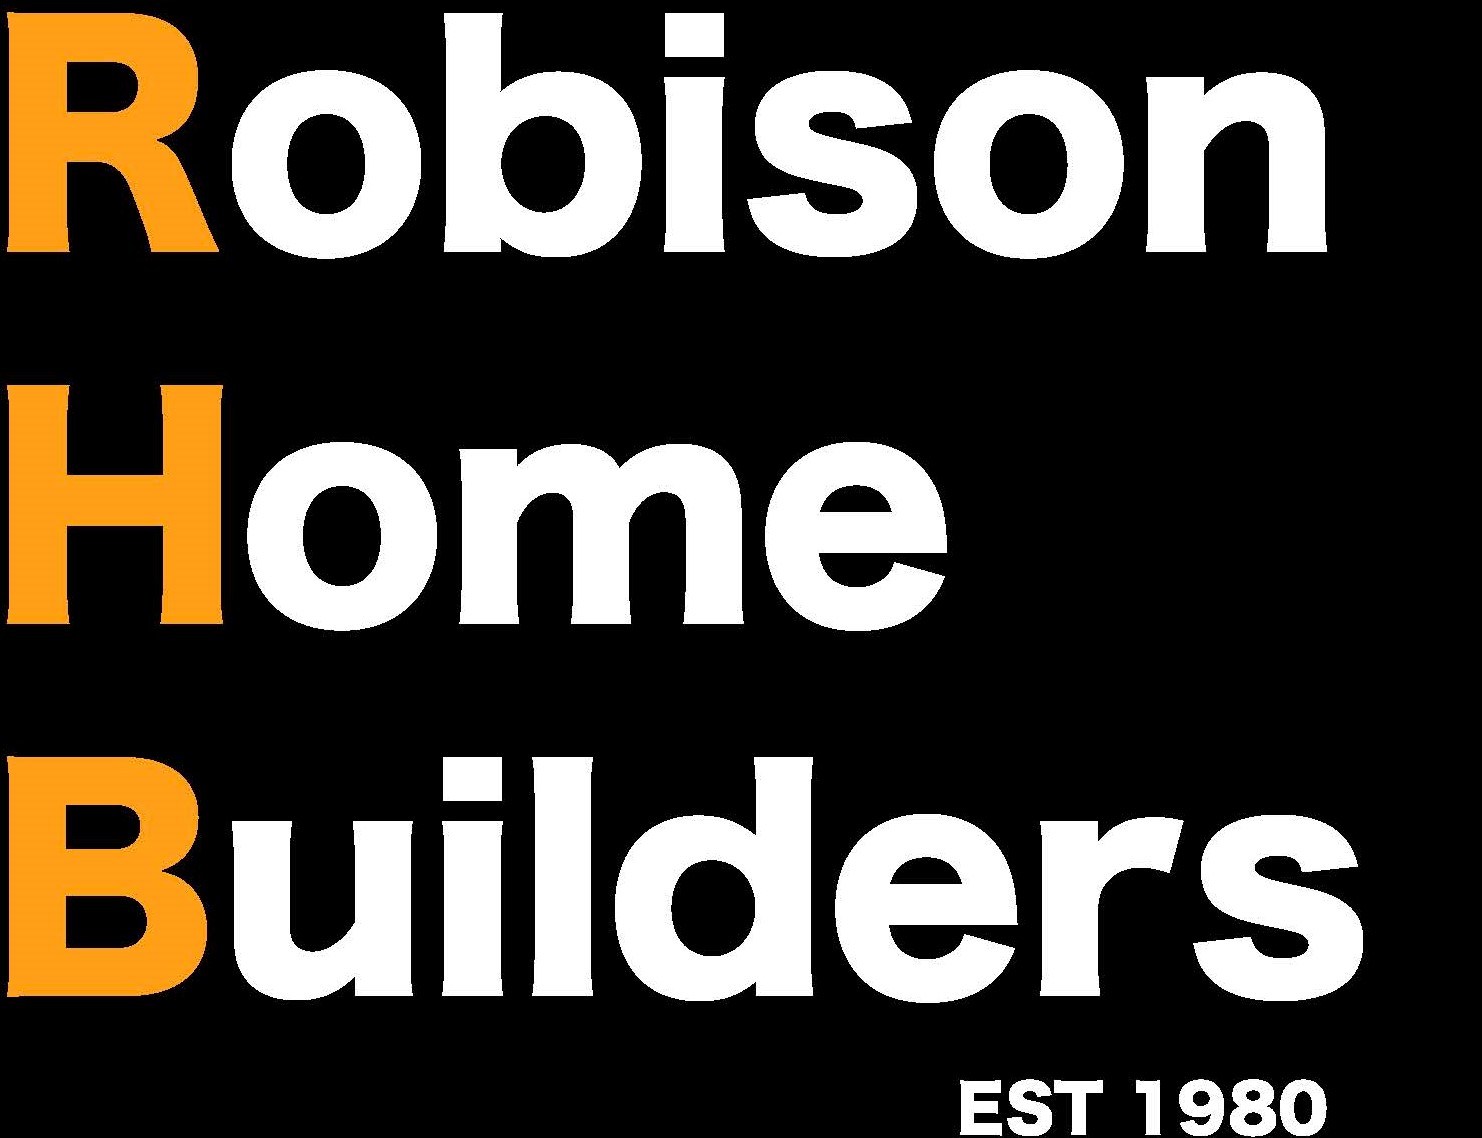 Robison Home Builders Logo 1 dragged